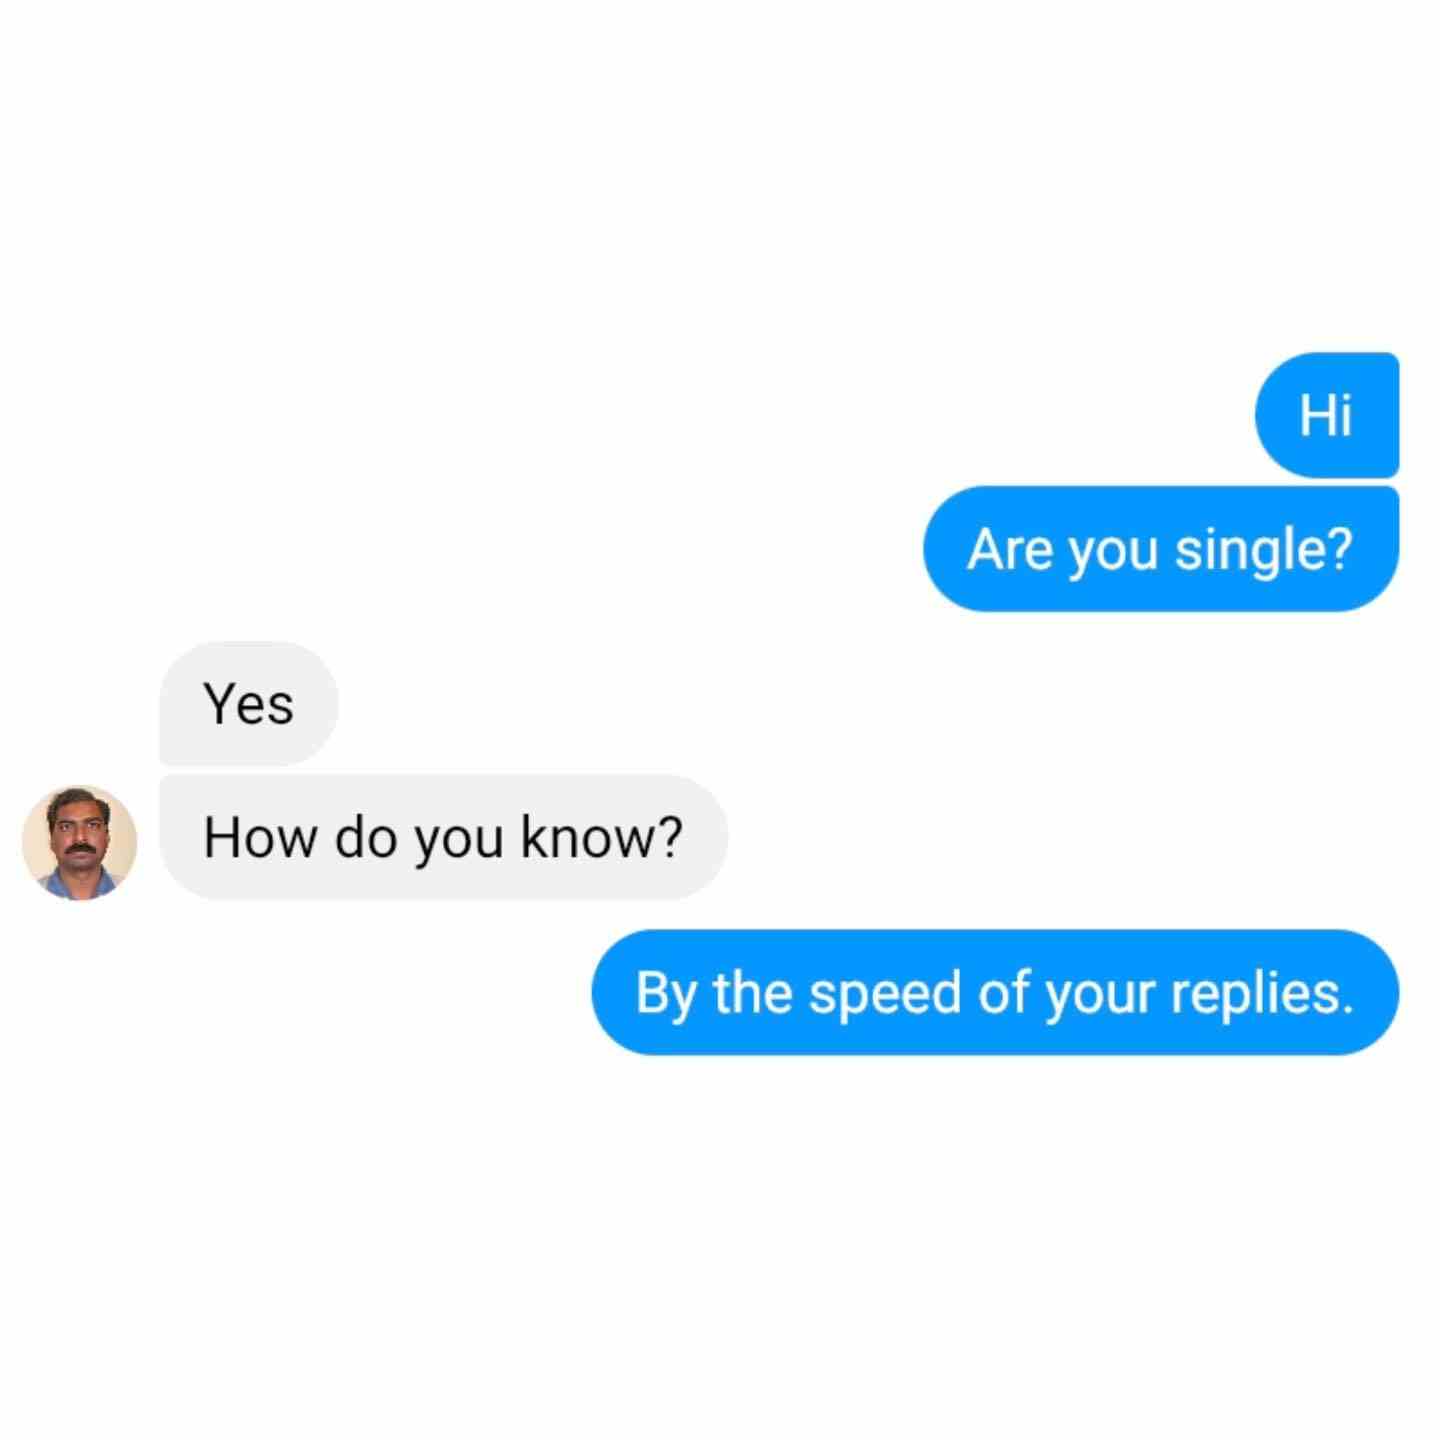 Are you single?